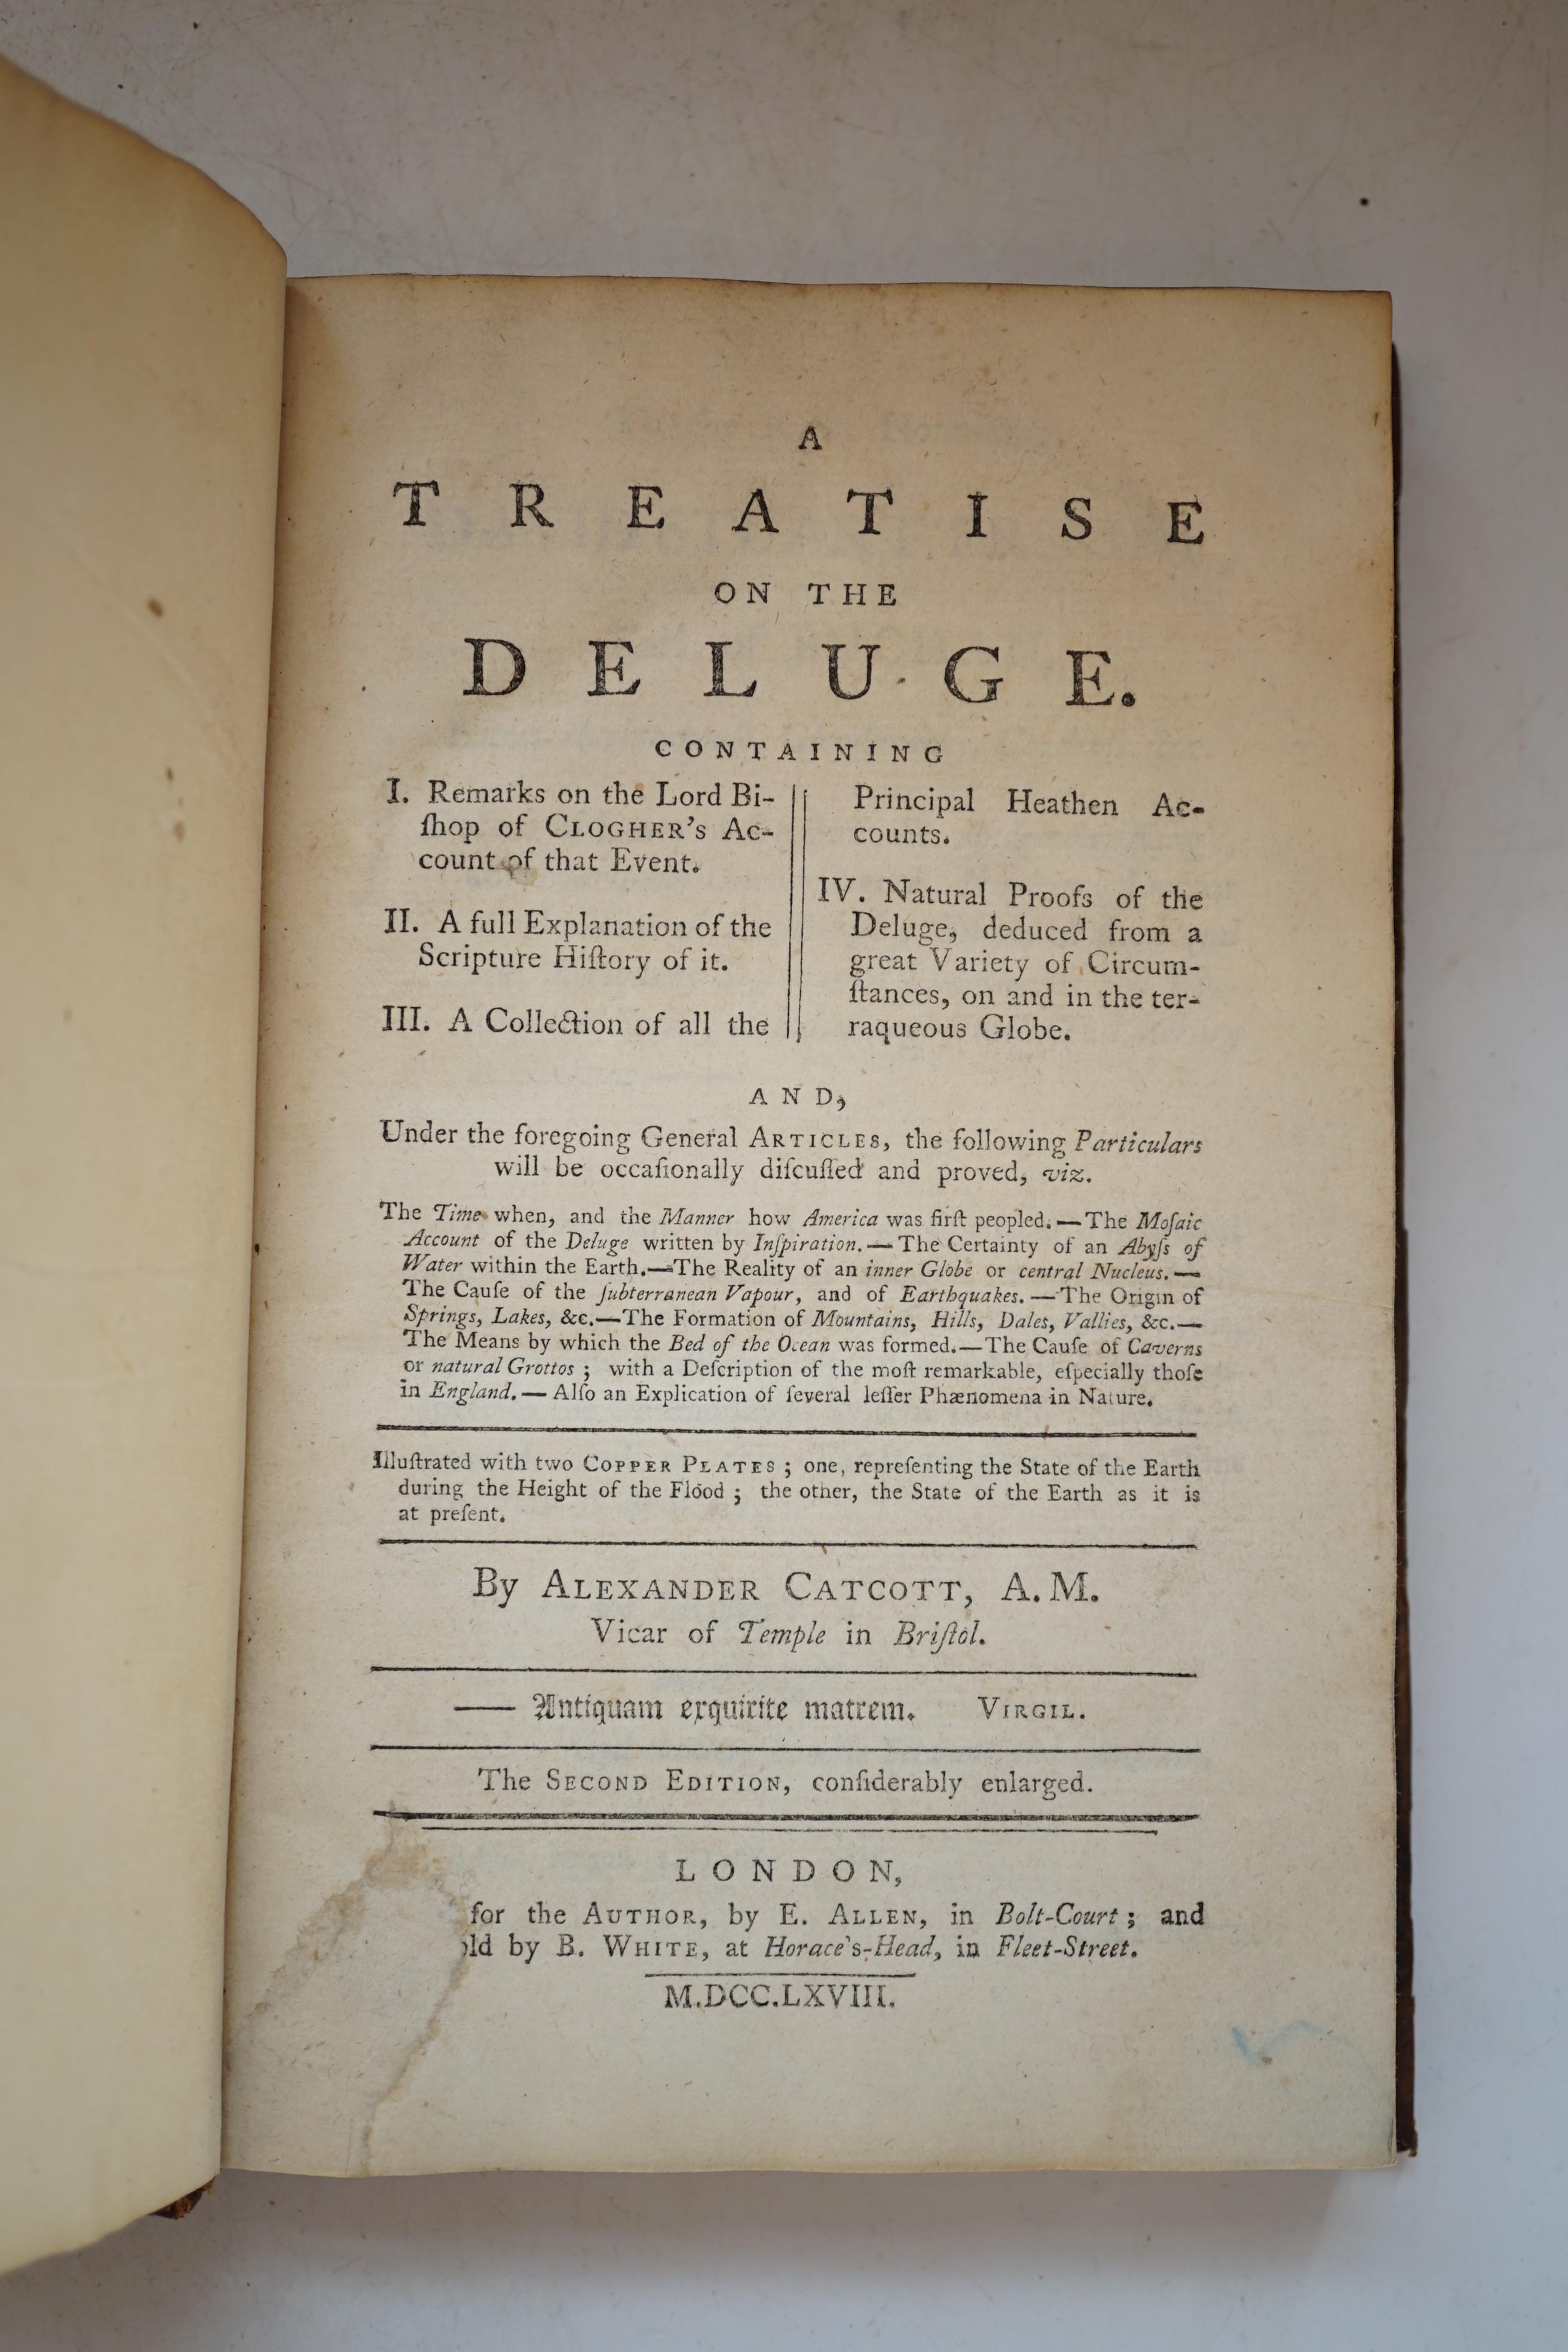 Catcott, Alexander - A Treatise on the Deluge. Containing I. Remarks on the Lord Bishop of Clogher's Account of that Event. II. A full Explanation of the Scripture History of it. III. A Collection of all the Principal He